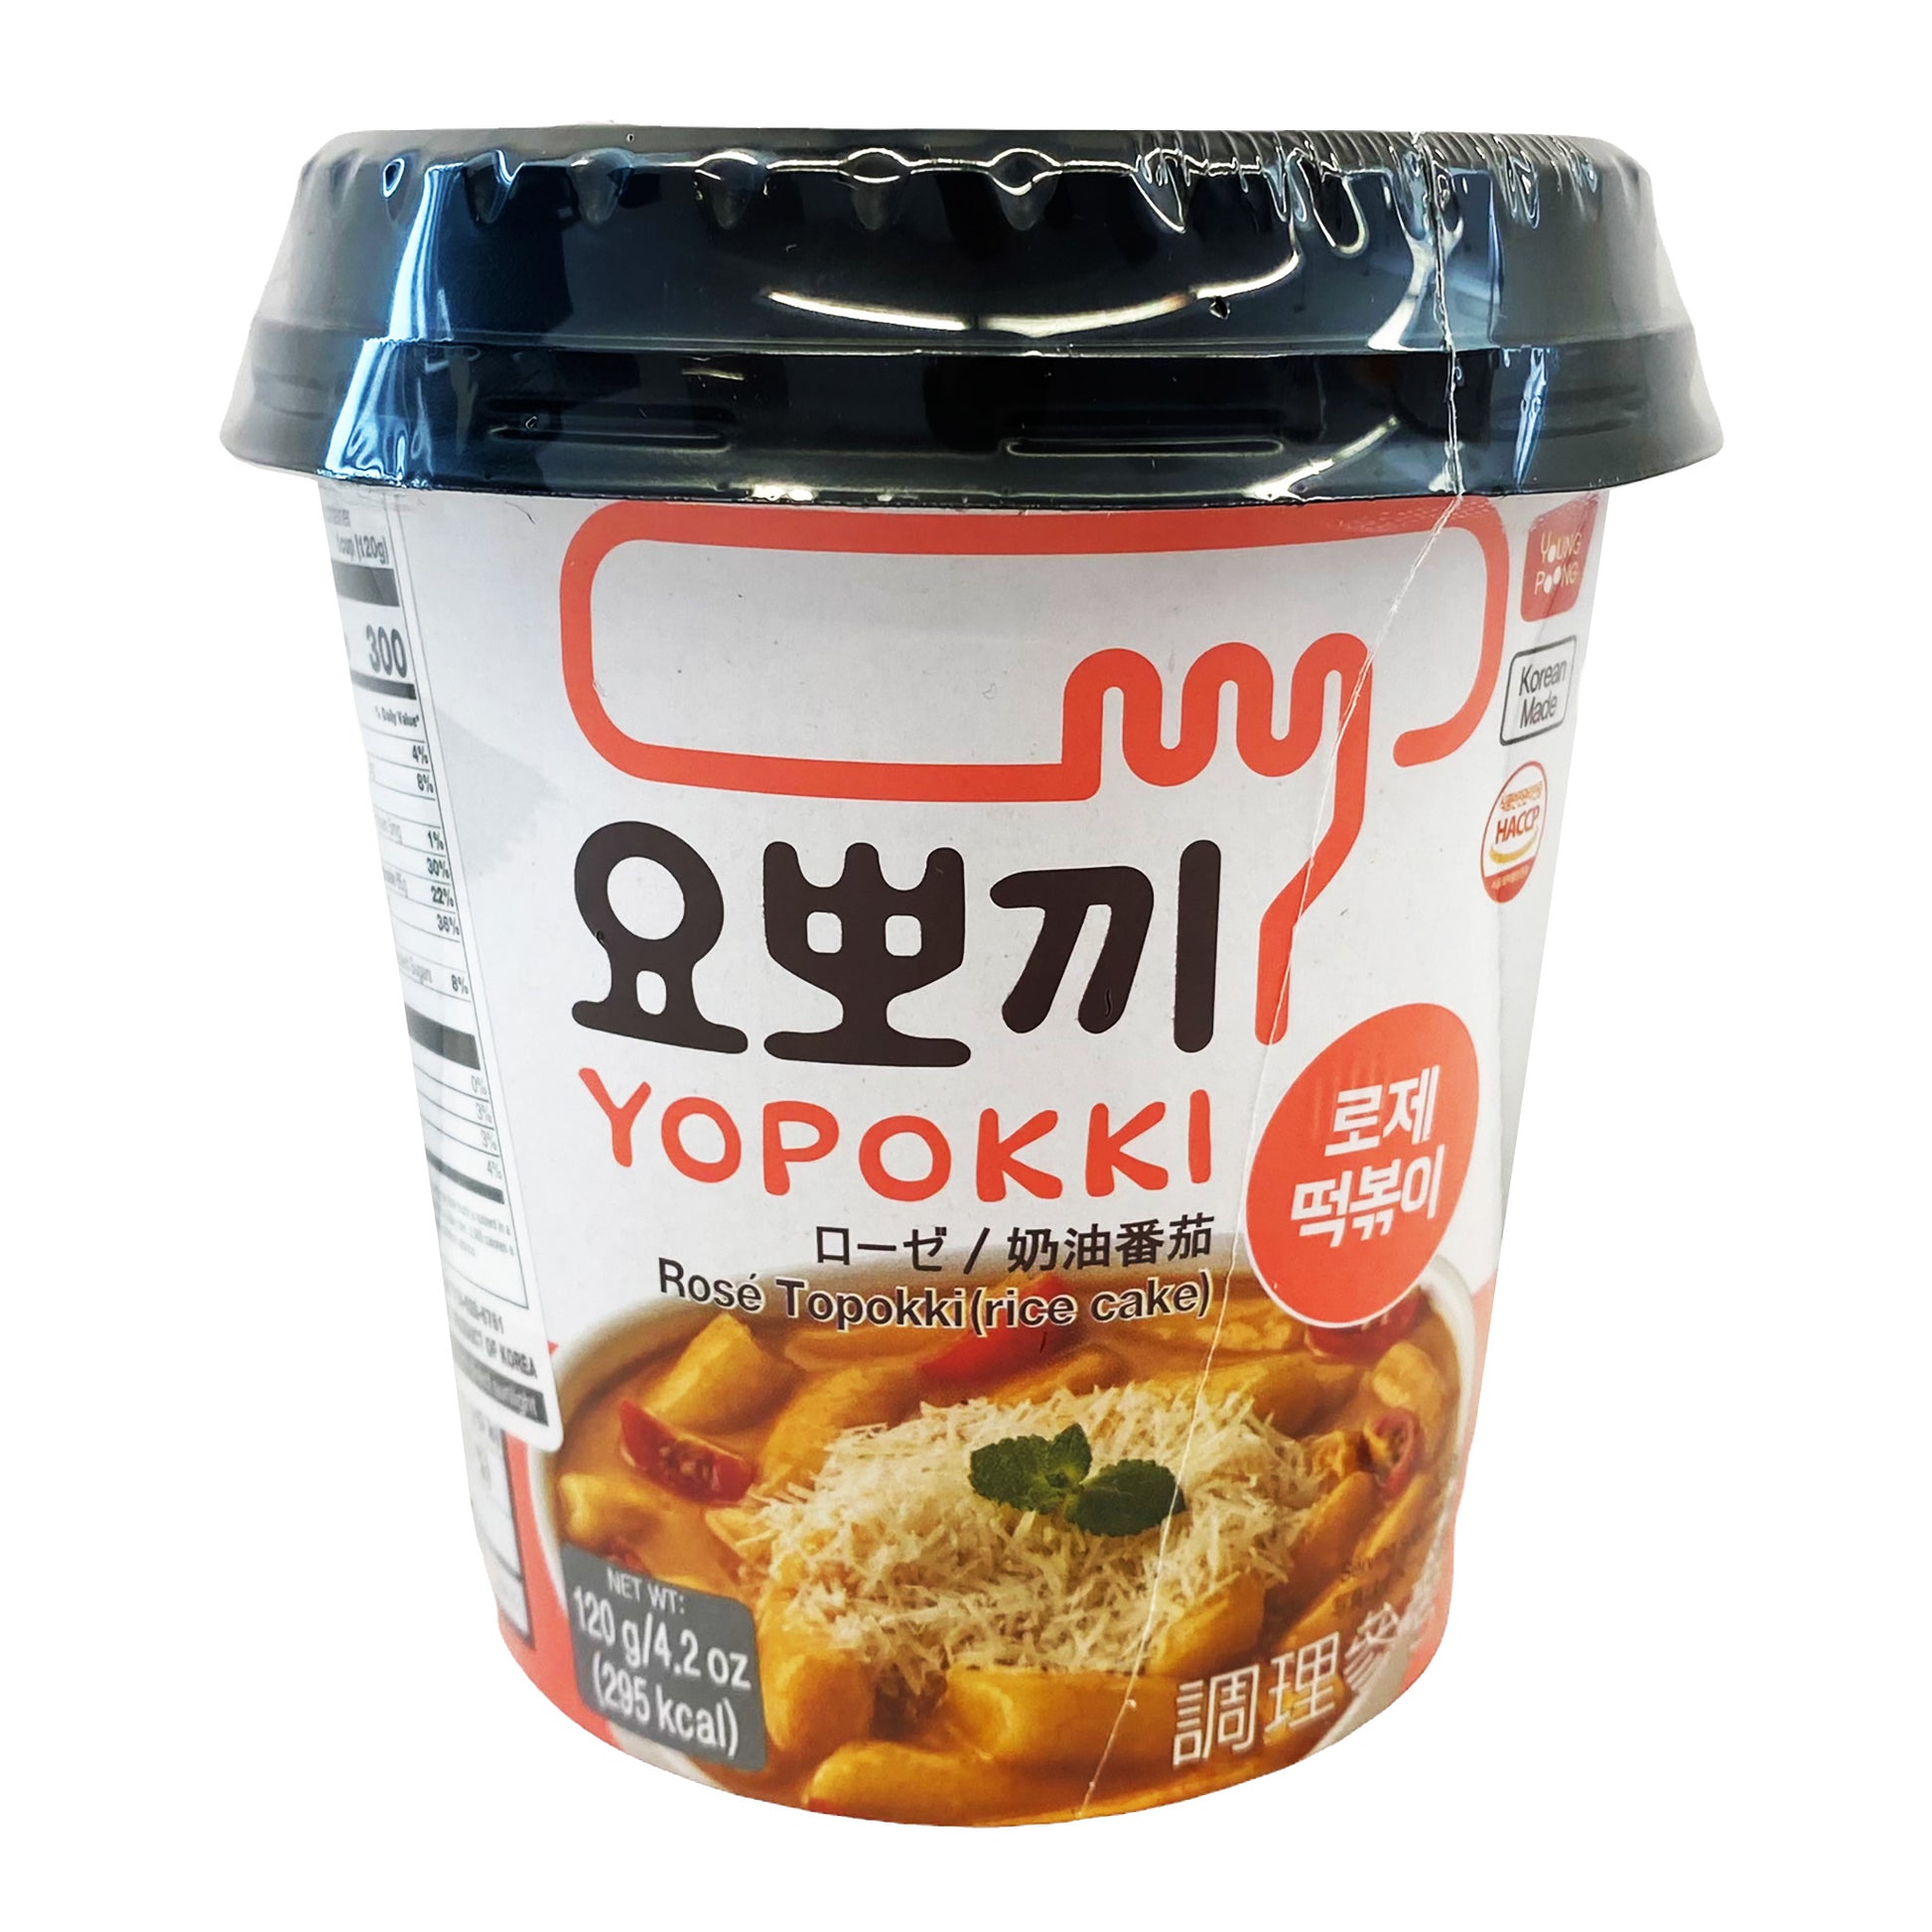 Front graphic image of Yopokki Rose Cup Topokki 4.2oz (120g)